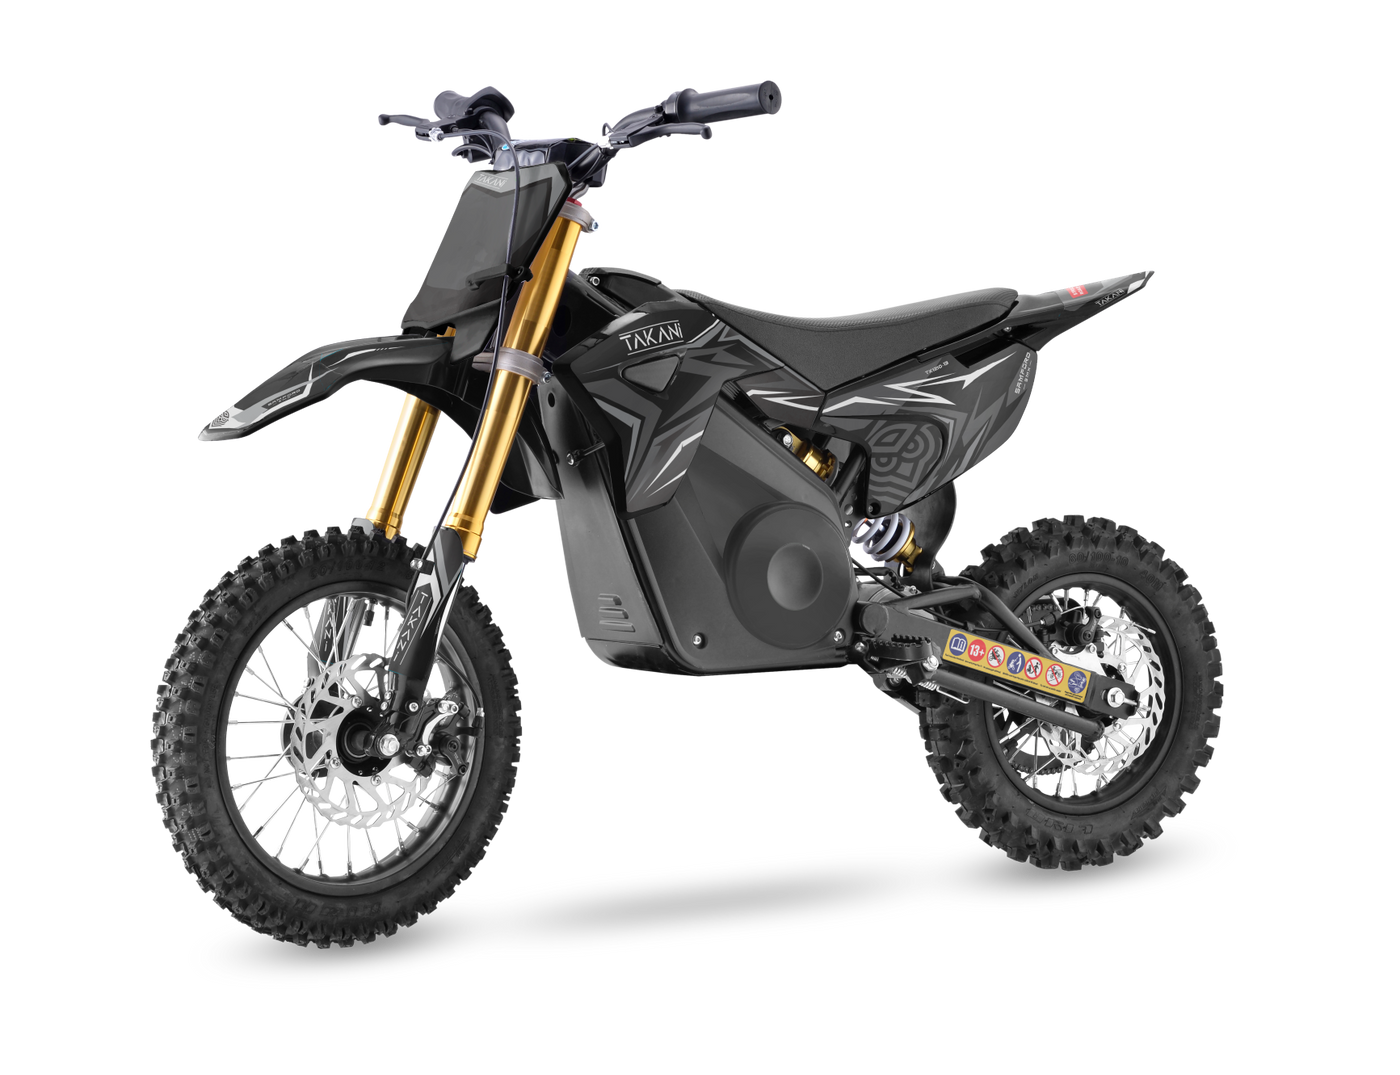 TAKANI electric motorbike for kids, this MIDI dirt bike is the perfect beginner motorbike for those looking to get into motocross or just have fun in the backyard.